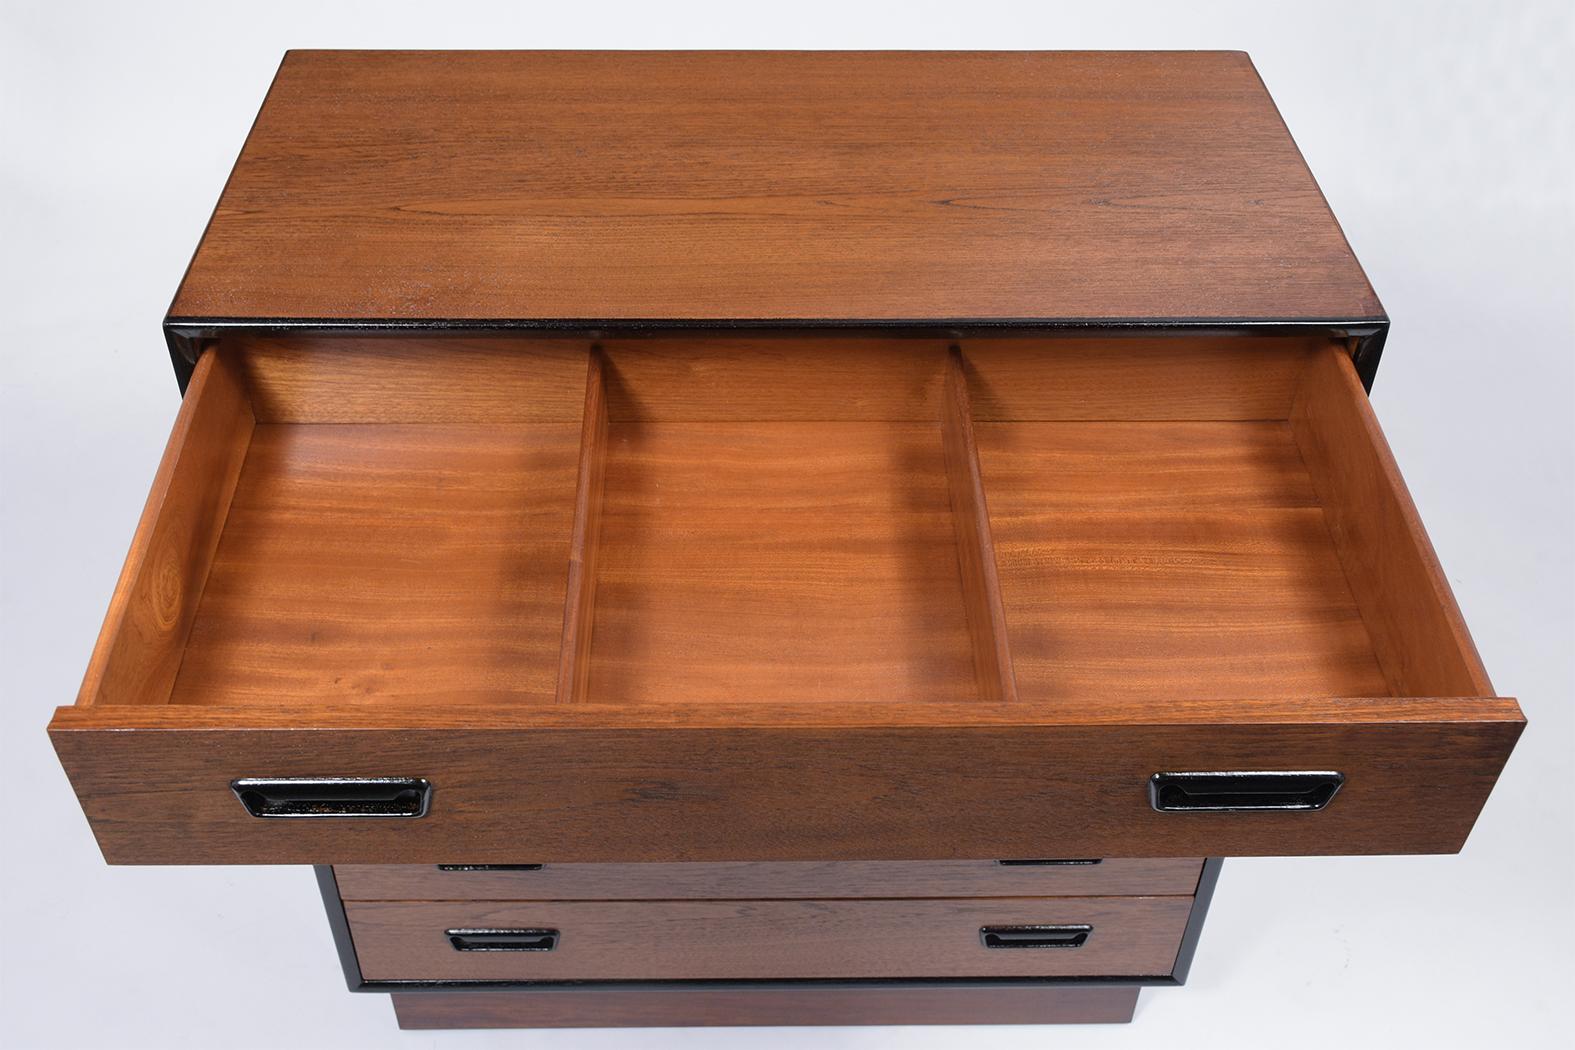 Stained 1960s Mid-Century Modern Danish Teak Wood Chest of Drawers with Ebonized Accents